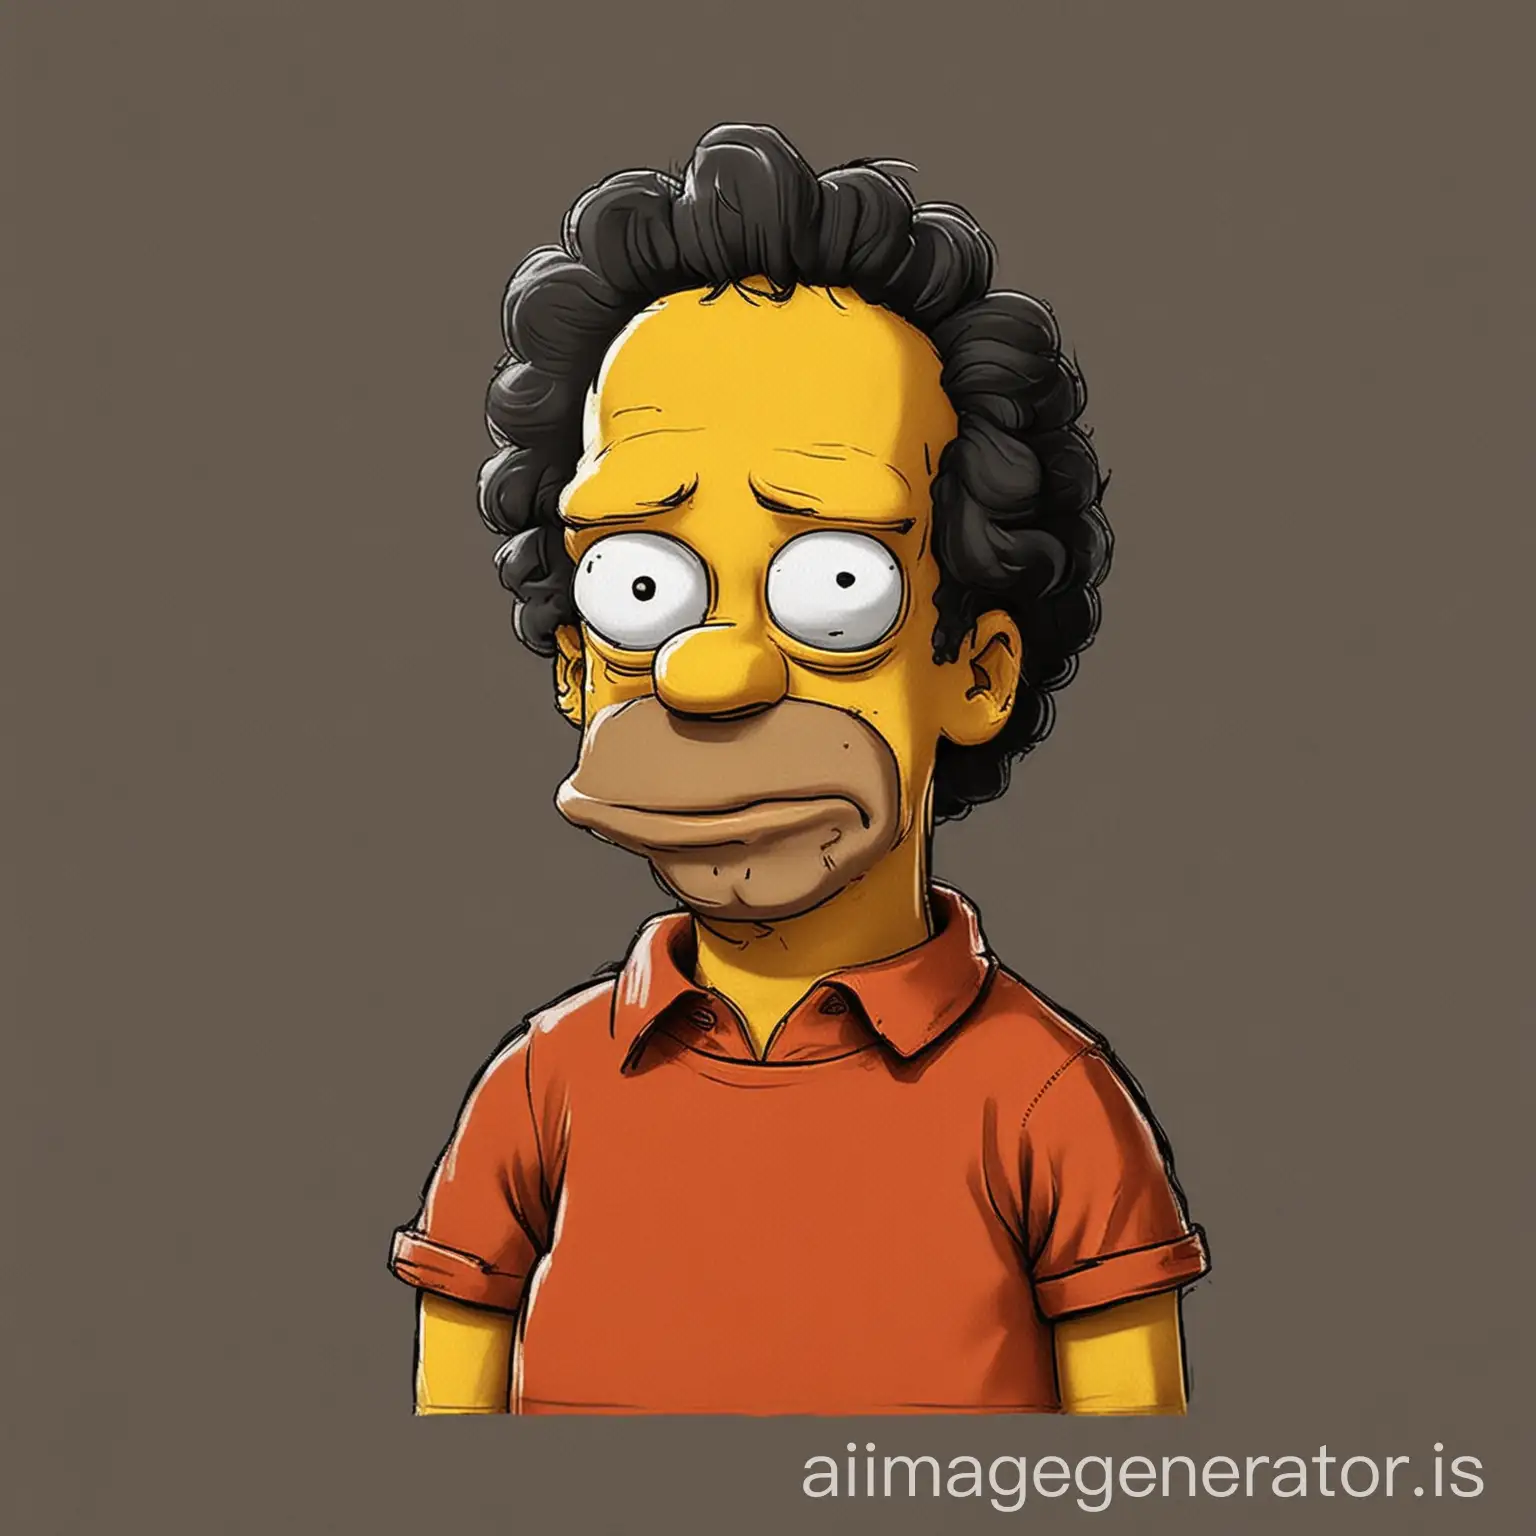 Simpsons-Style-Cartoon-Character-with-TShirt